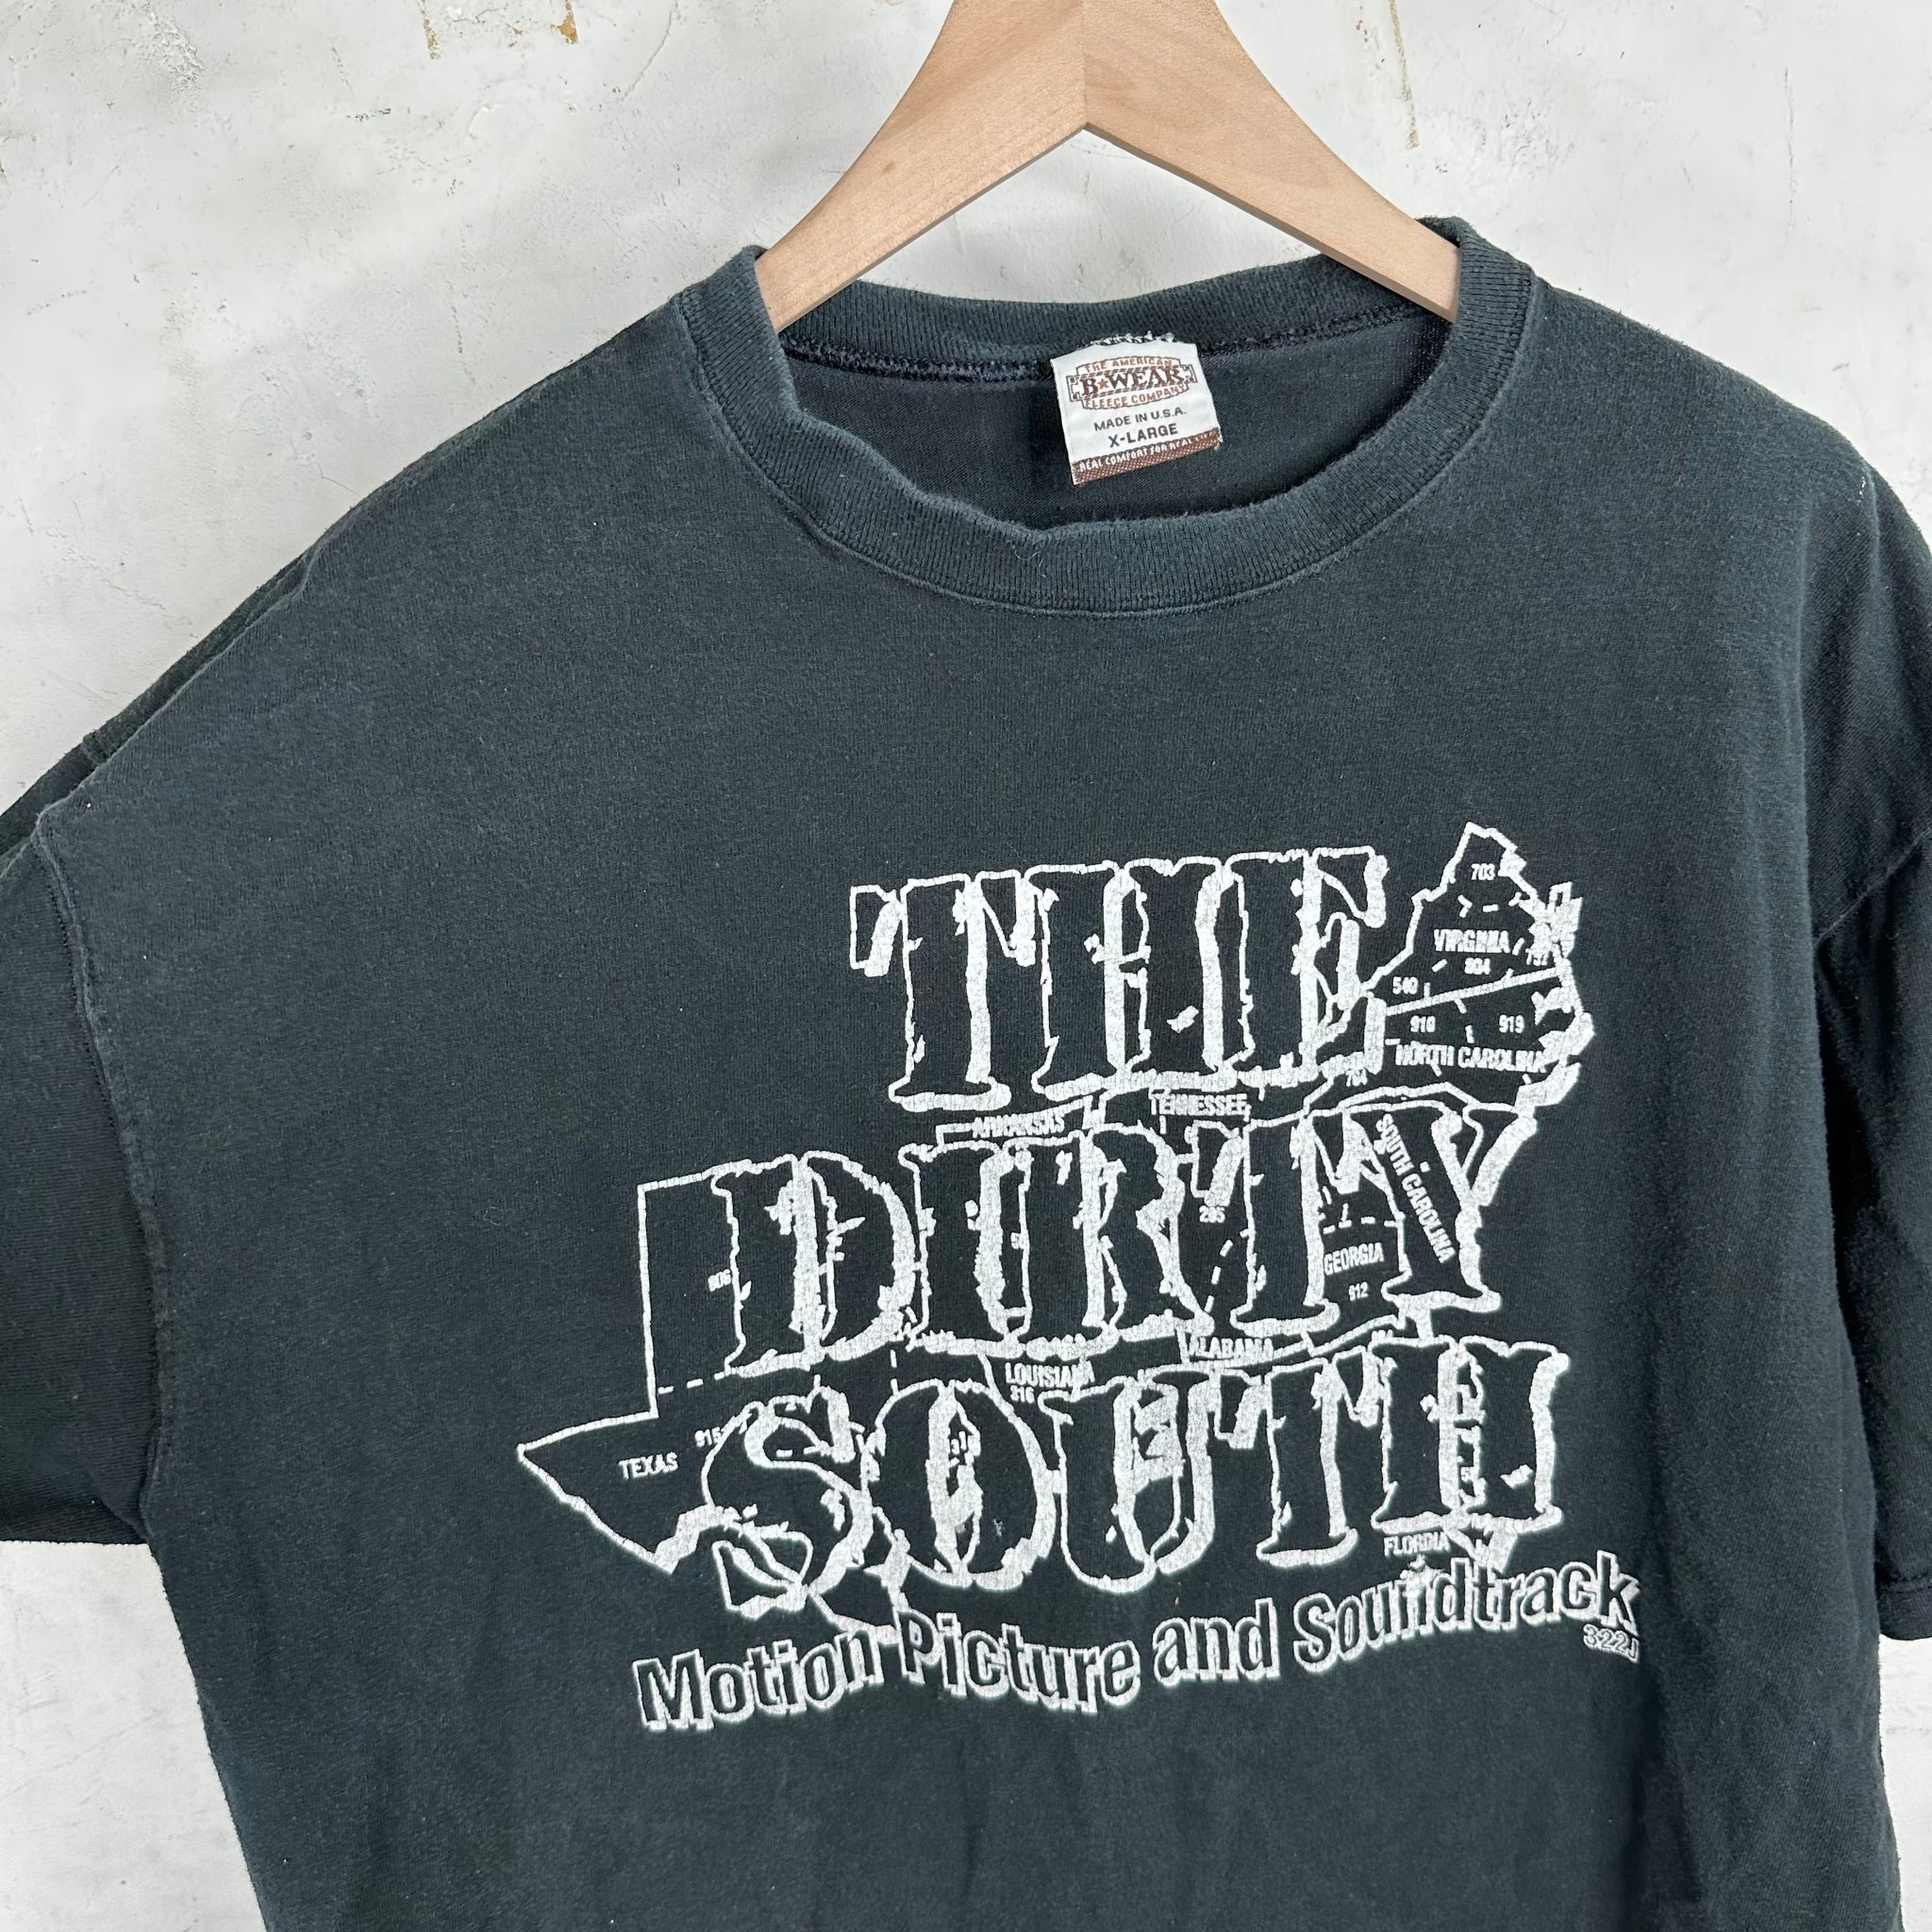 Vintage The Dirty South T-Shirt